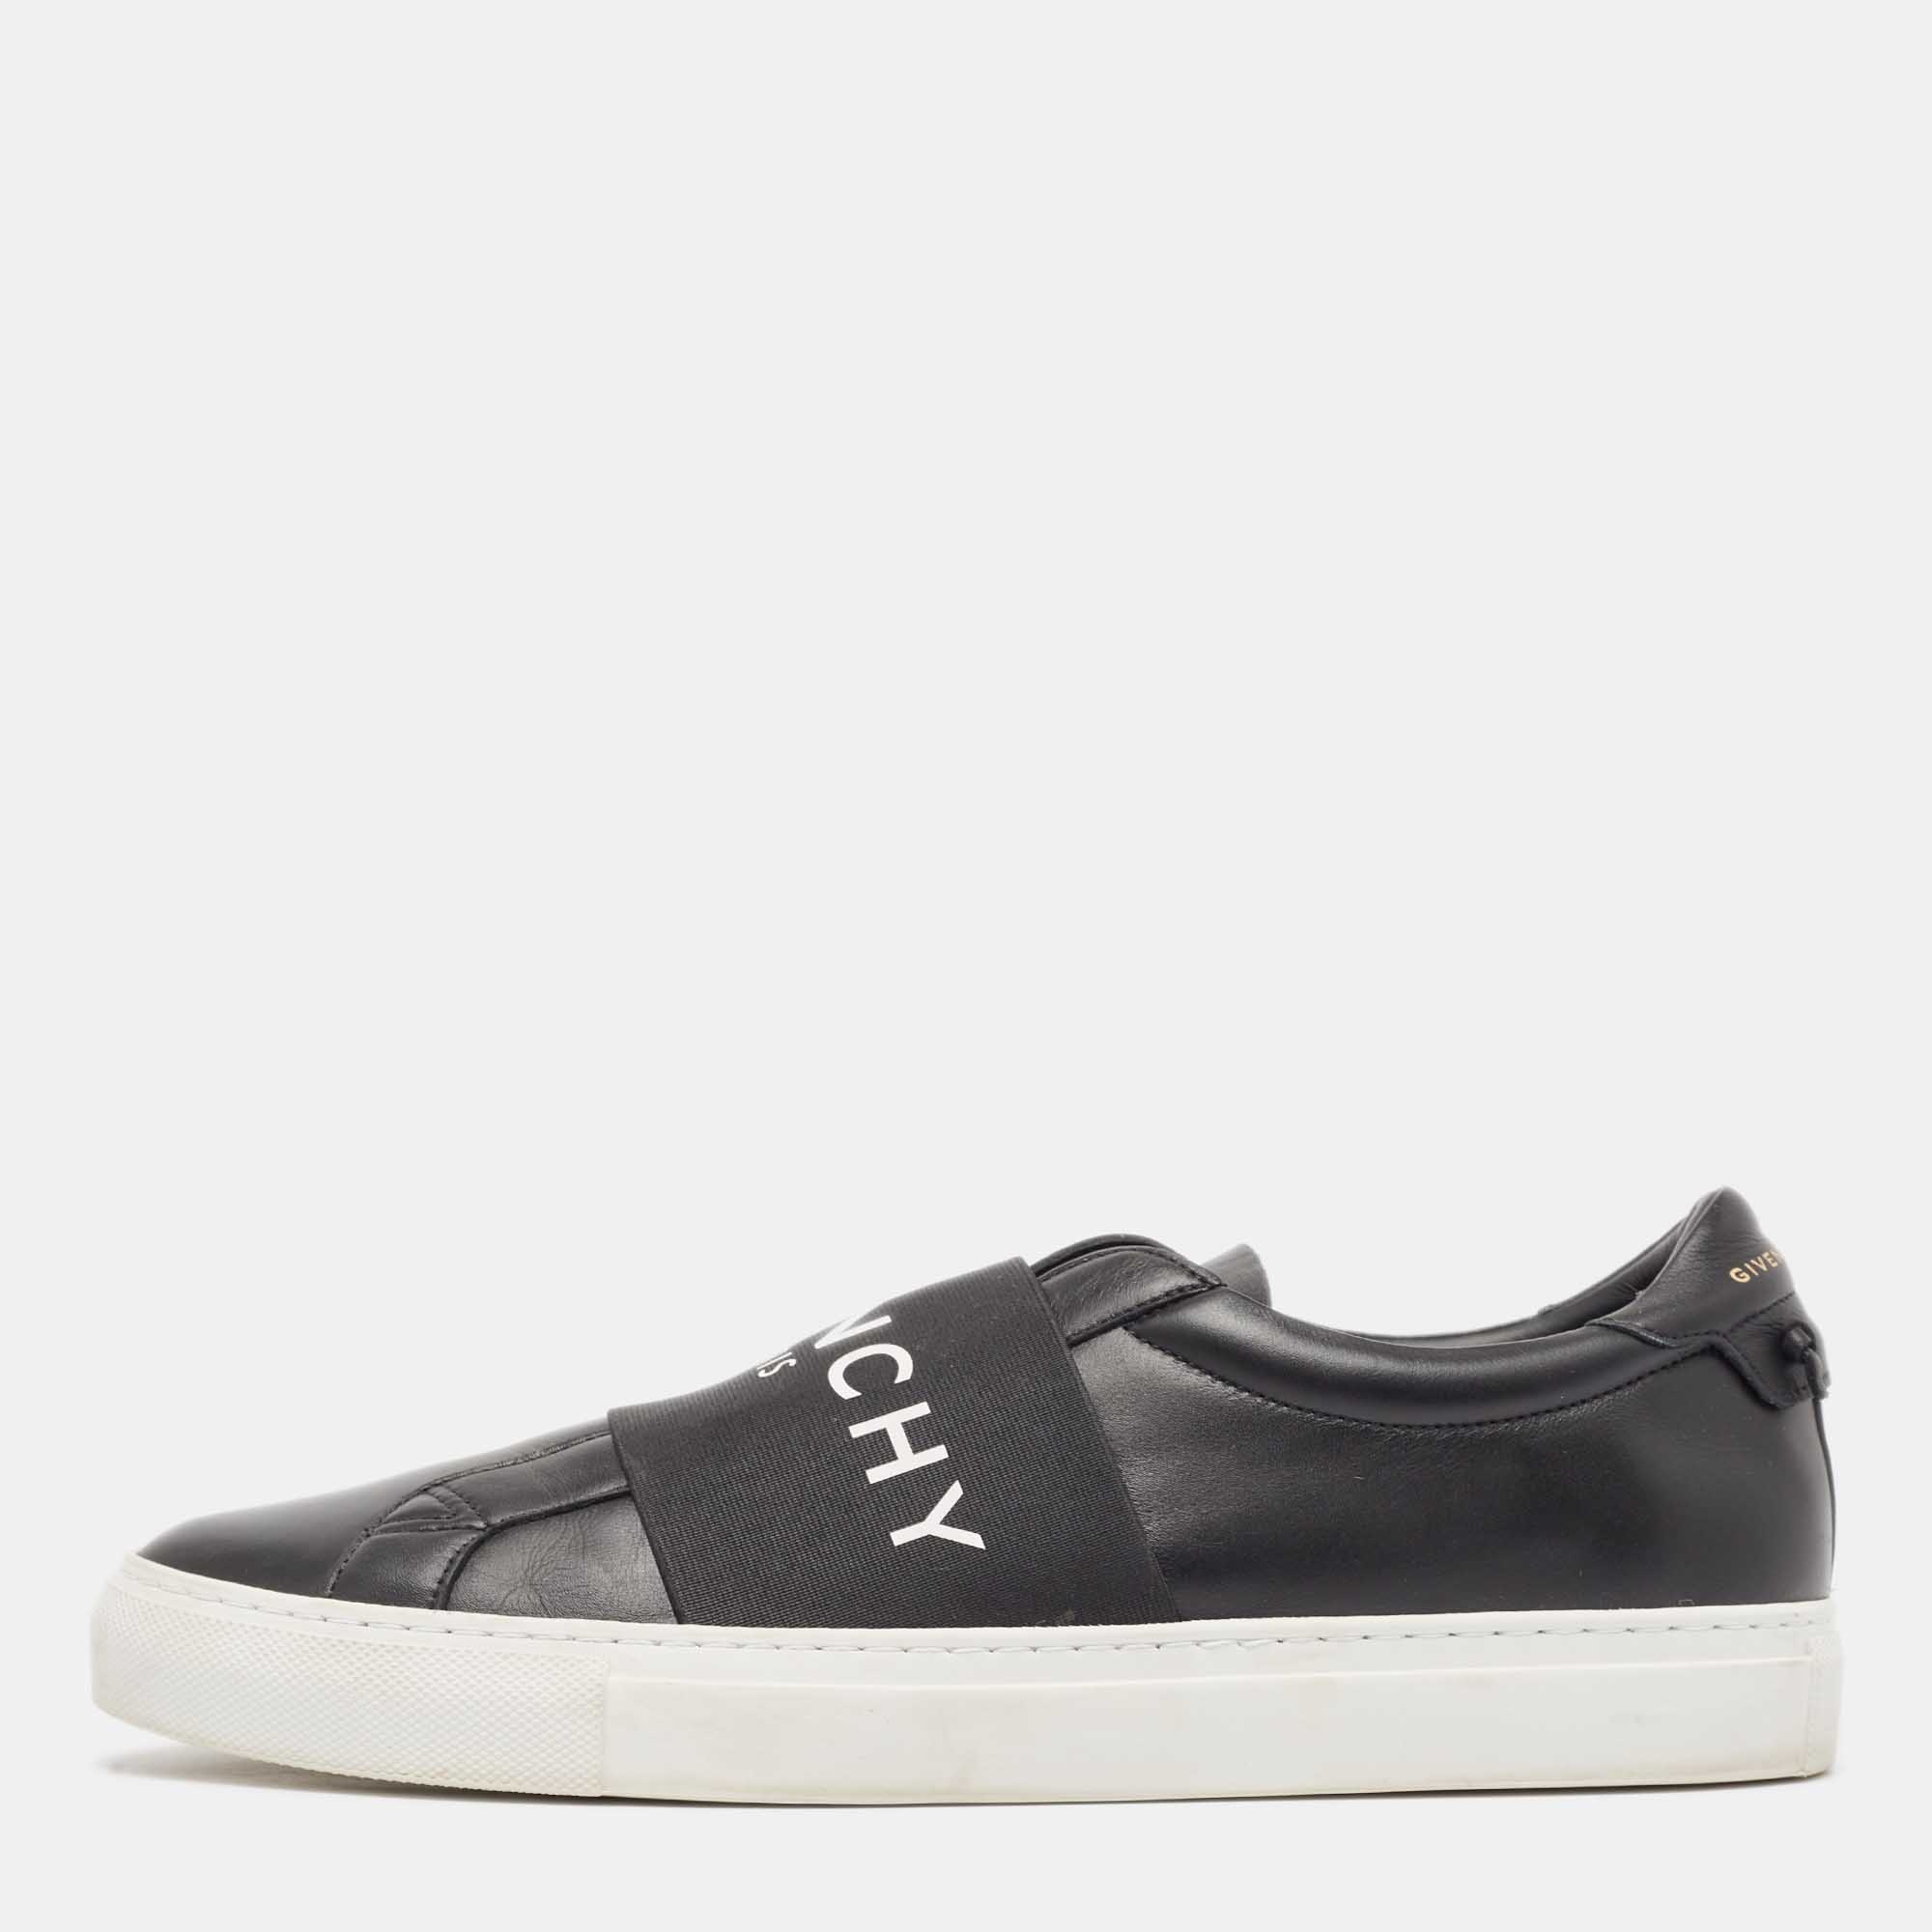 Coming in a classic silhouette these designer sneakers are a seamless combination of luxury comfort and style. These sneakers are finished with signature details and comfortable insoles.